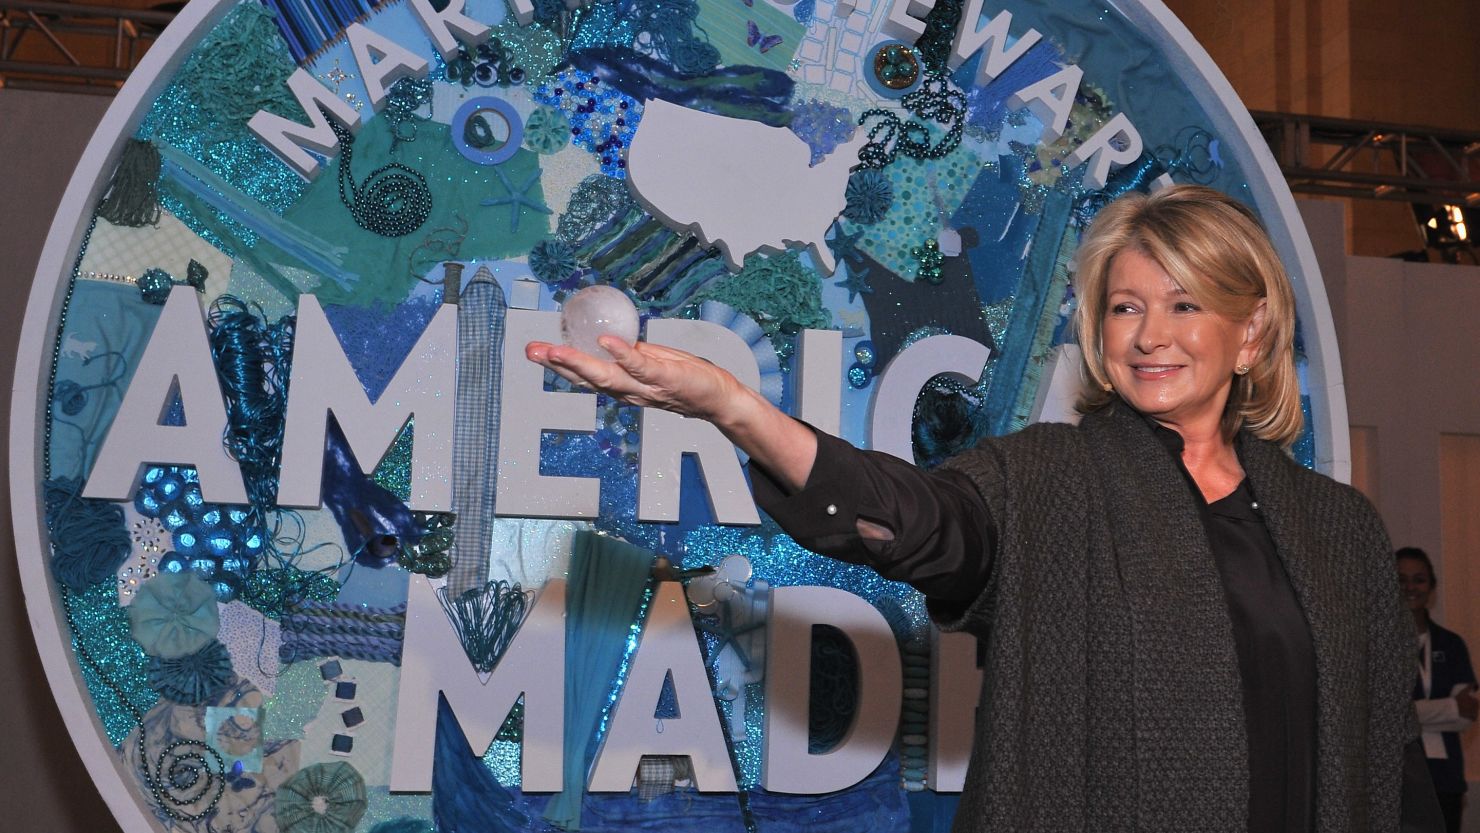 Martha Stewart demonstrates tips during her American Made Program last year in New York City's Grand Central Terminal. 
